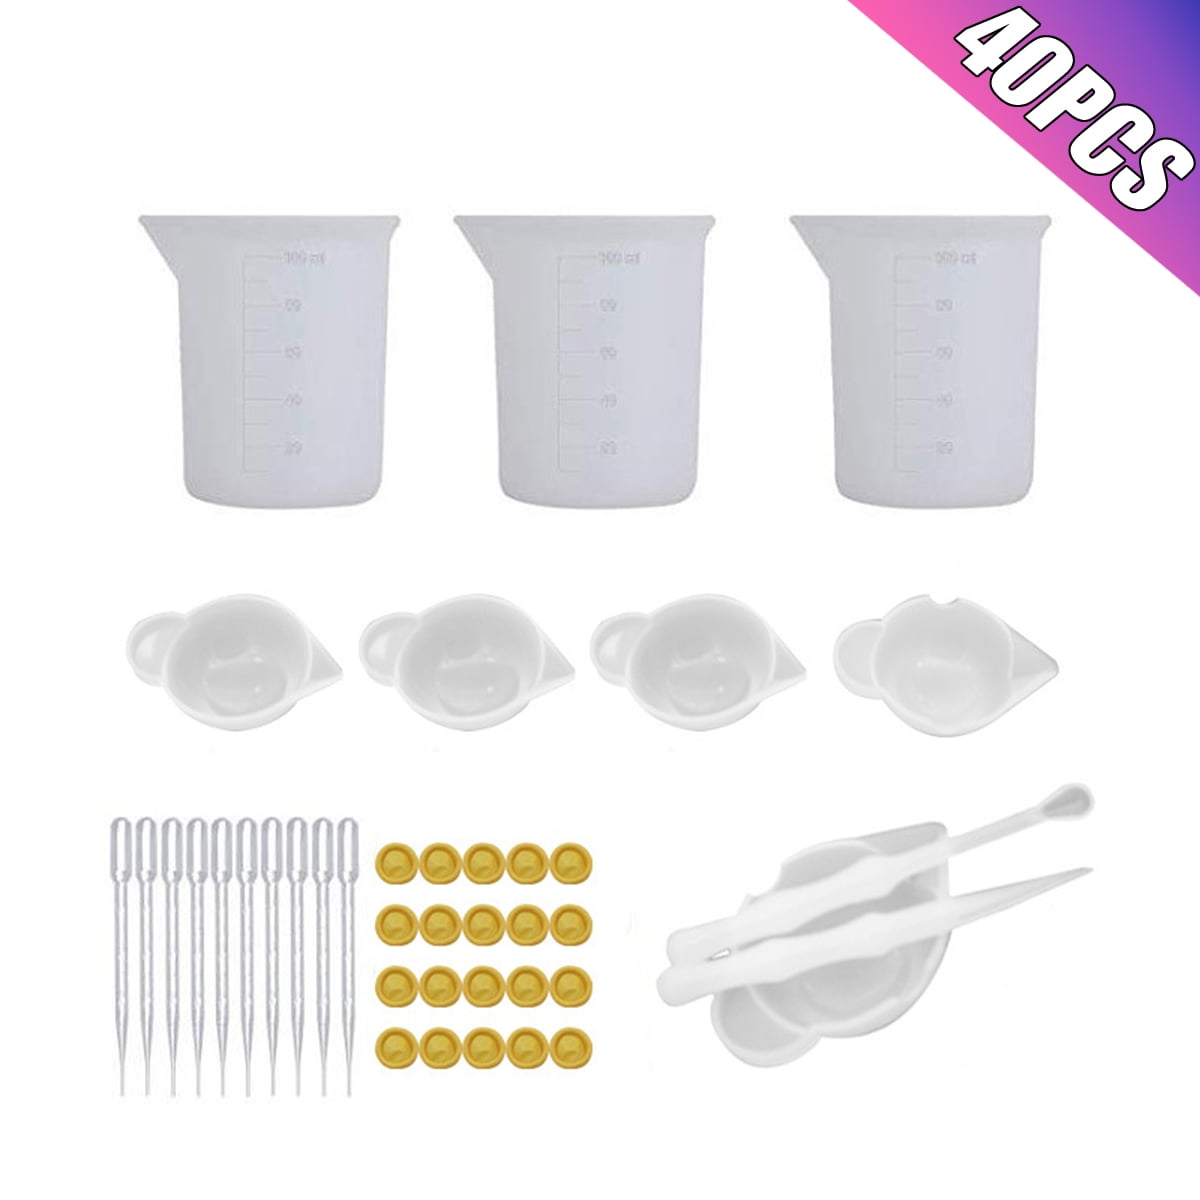 Silicone Measuring Cup Resin Glue DIY Tool Jewelry Make J2Z6 